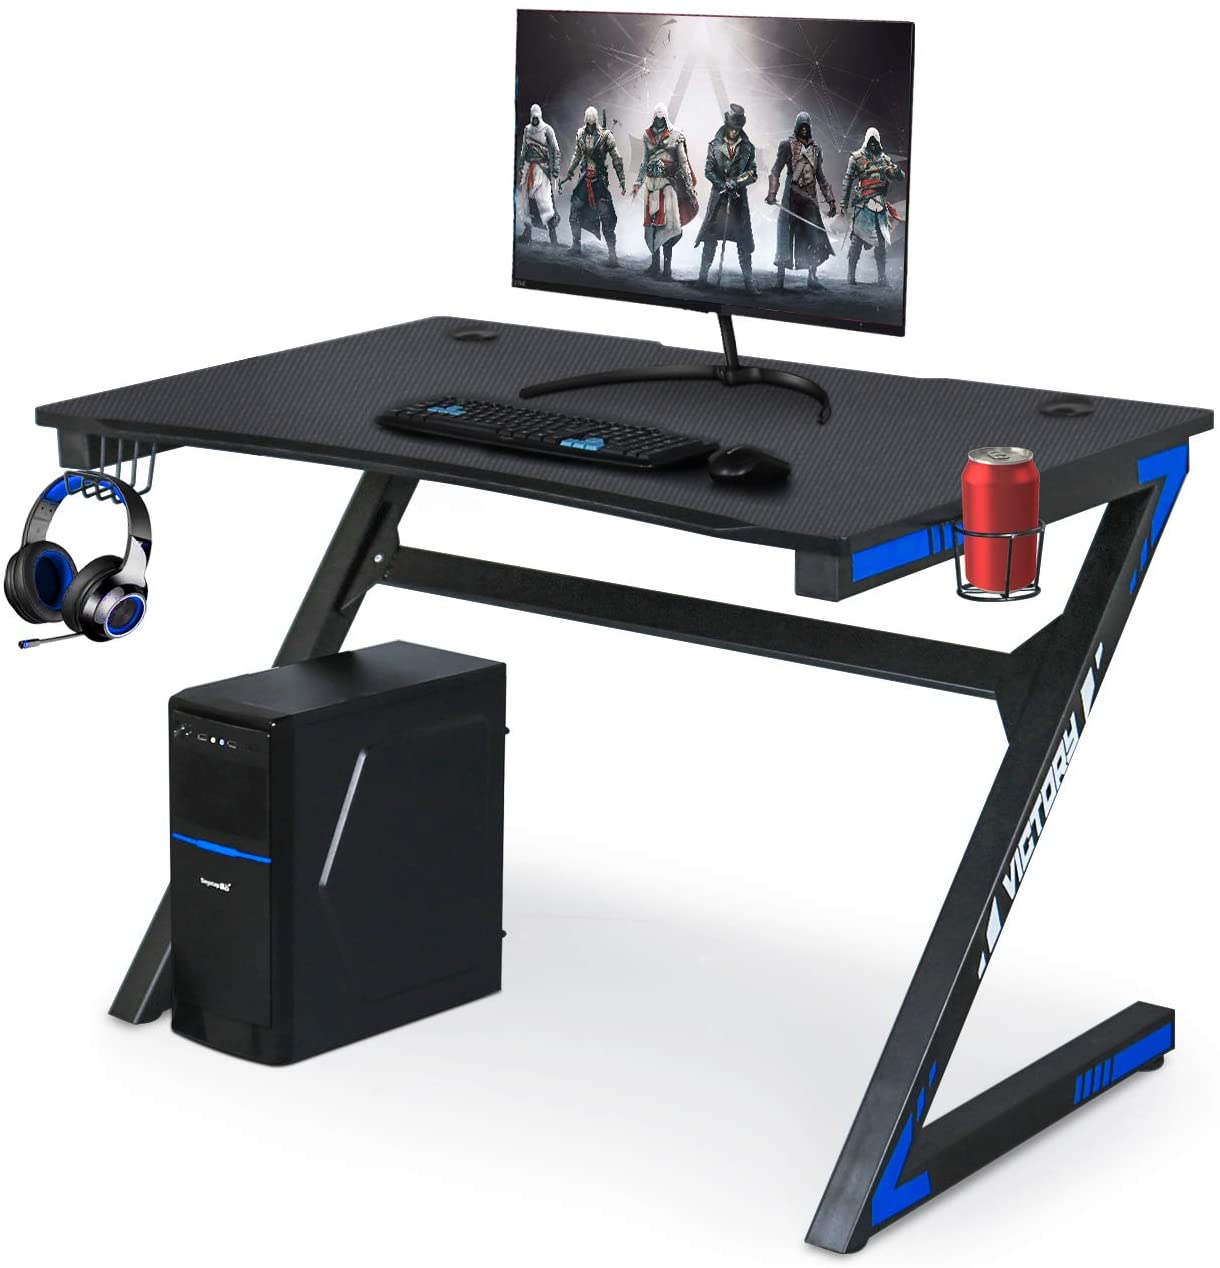 Details about   47in Gaming Desk Home Office Computer Table Ergonomic Racing Style Gamer Student 